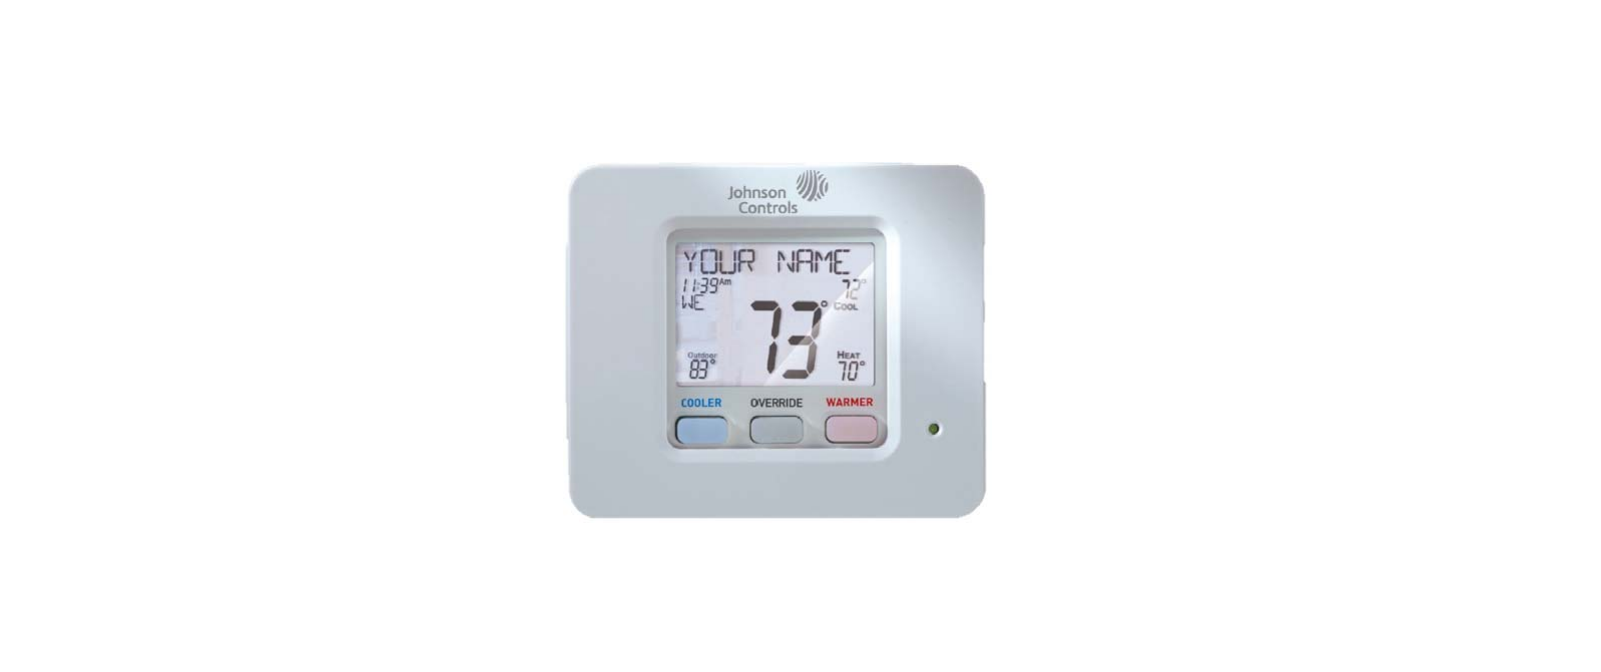 Johnson Controls T8490 Digital Room Thermostat PRODUCT SPECIFICATION GUIDE